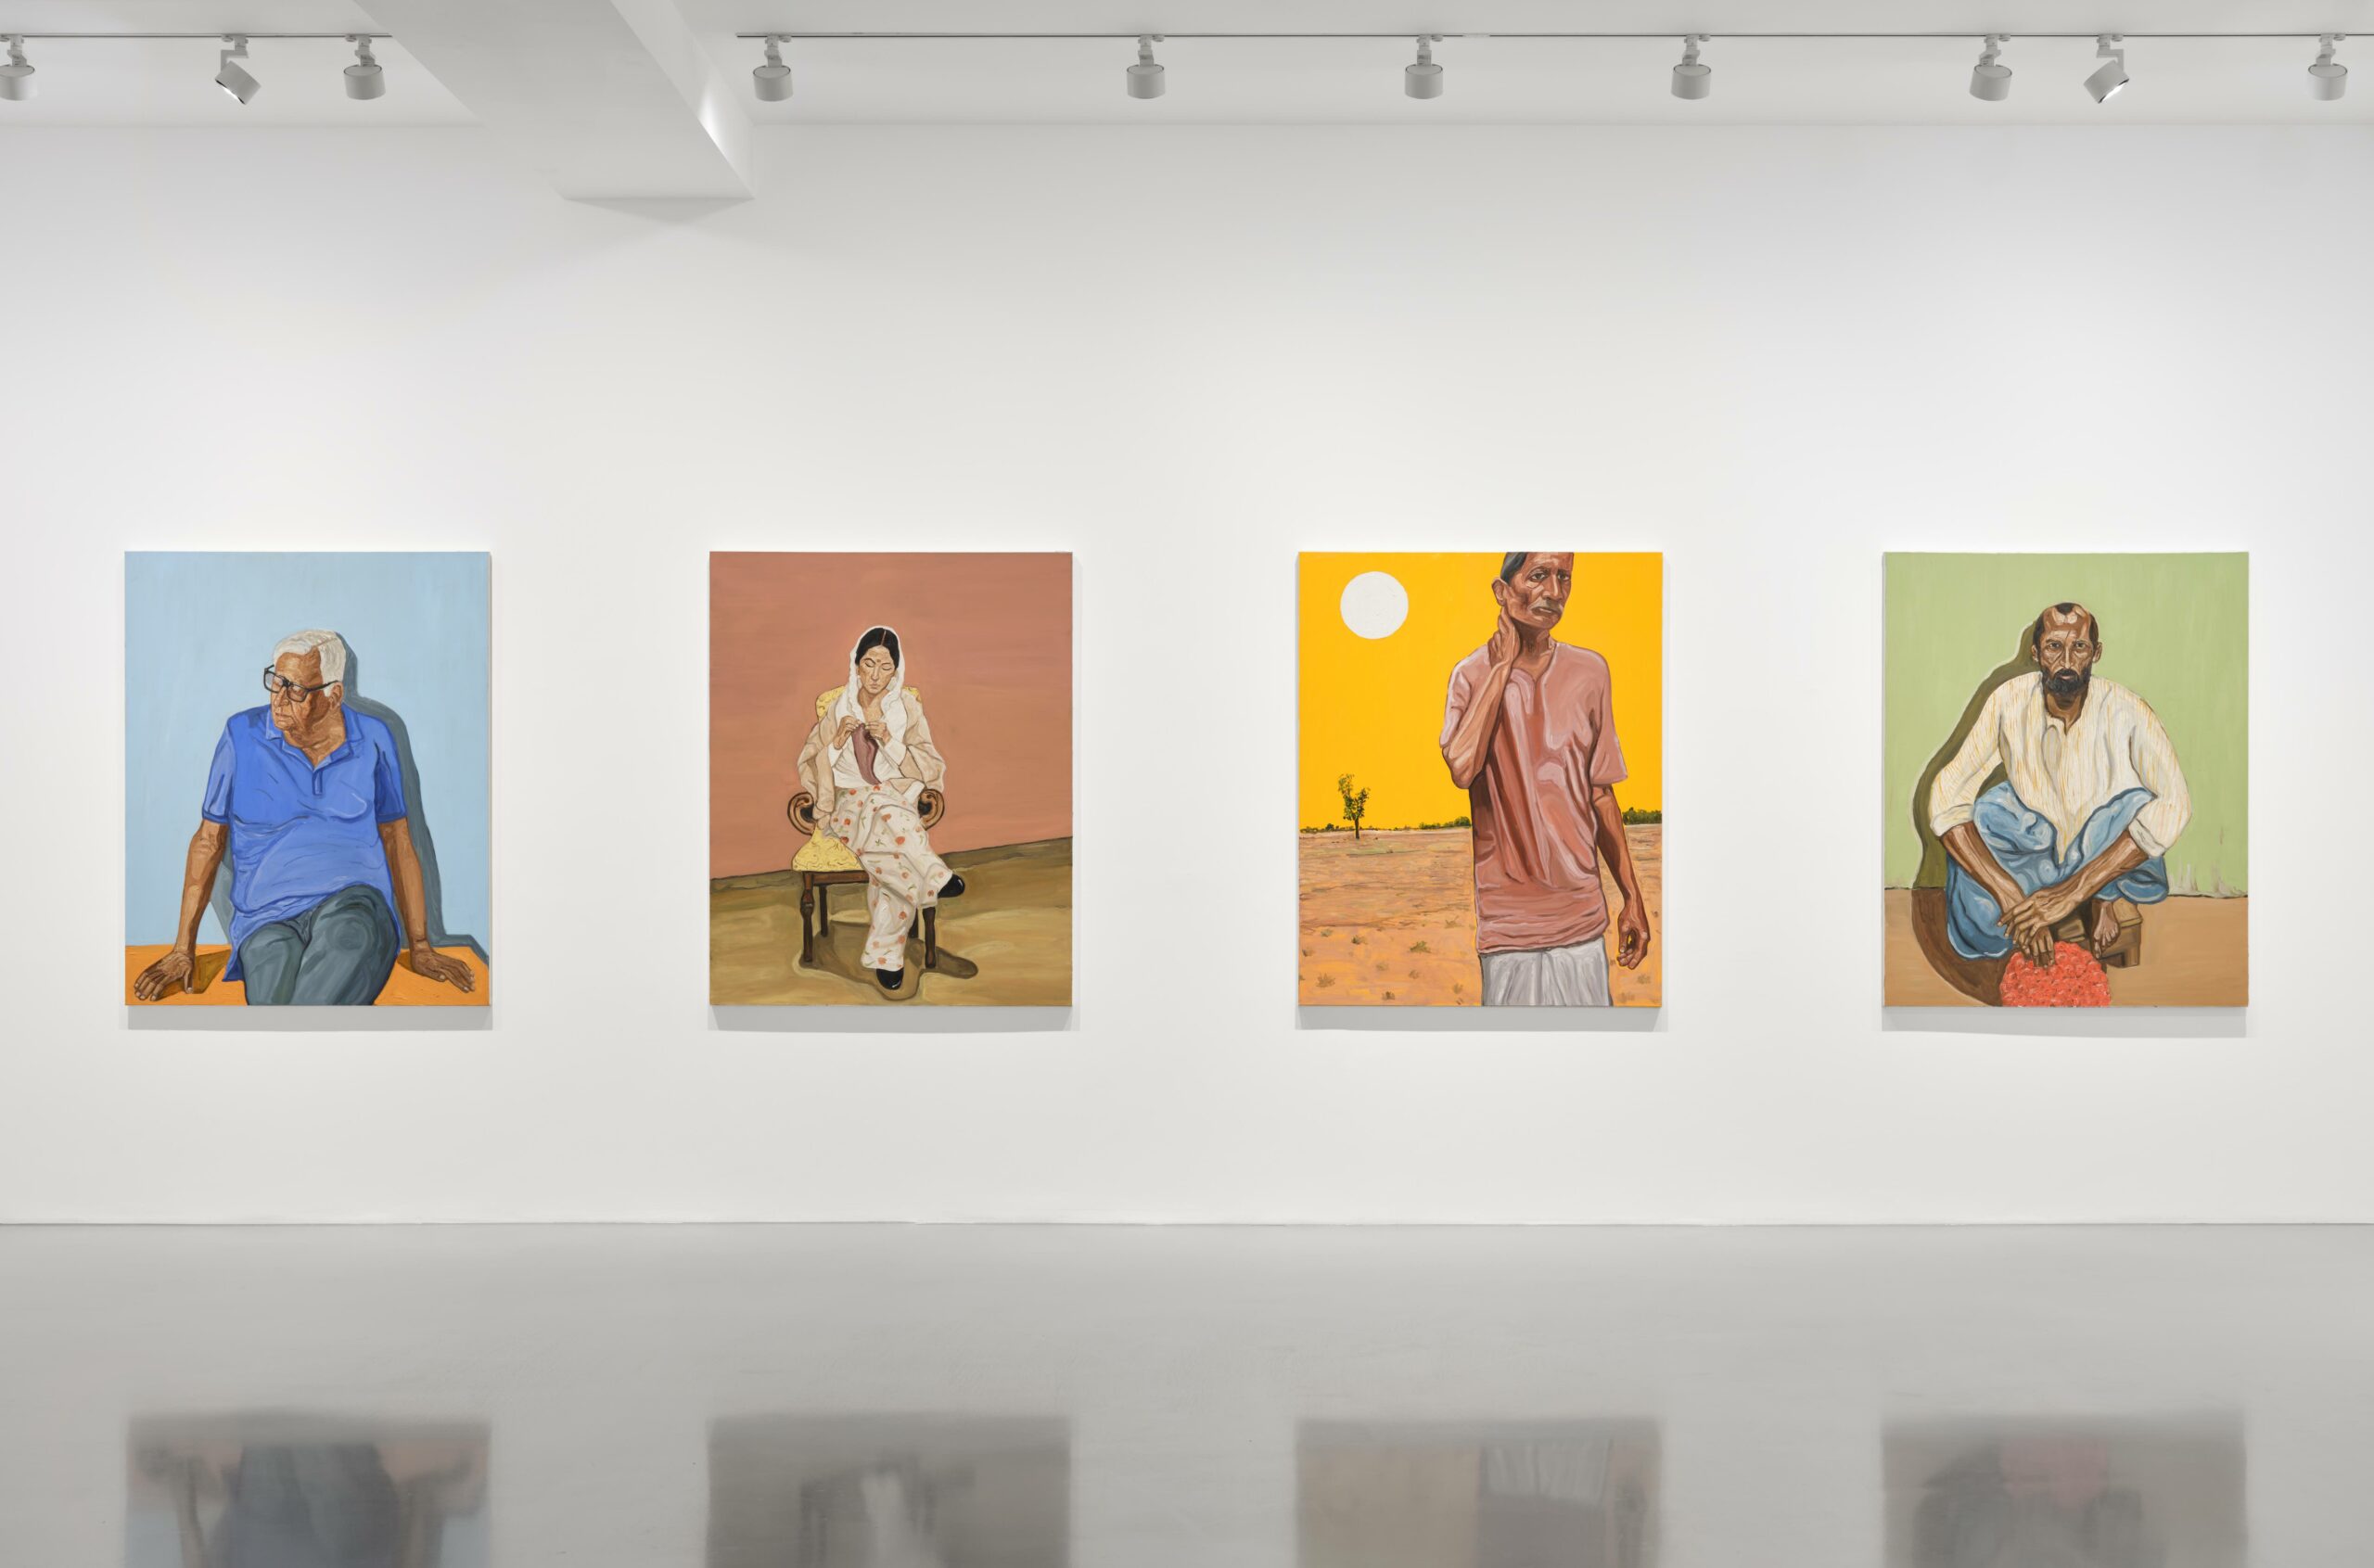 Installation image of Raghav Babbar: New Paintings. 4 colourful portraits in a row